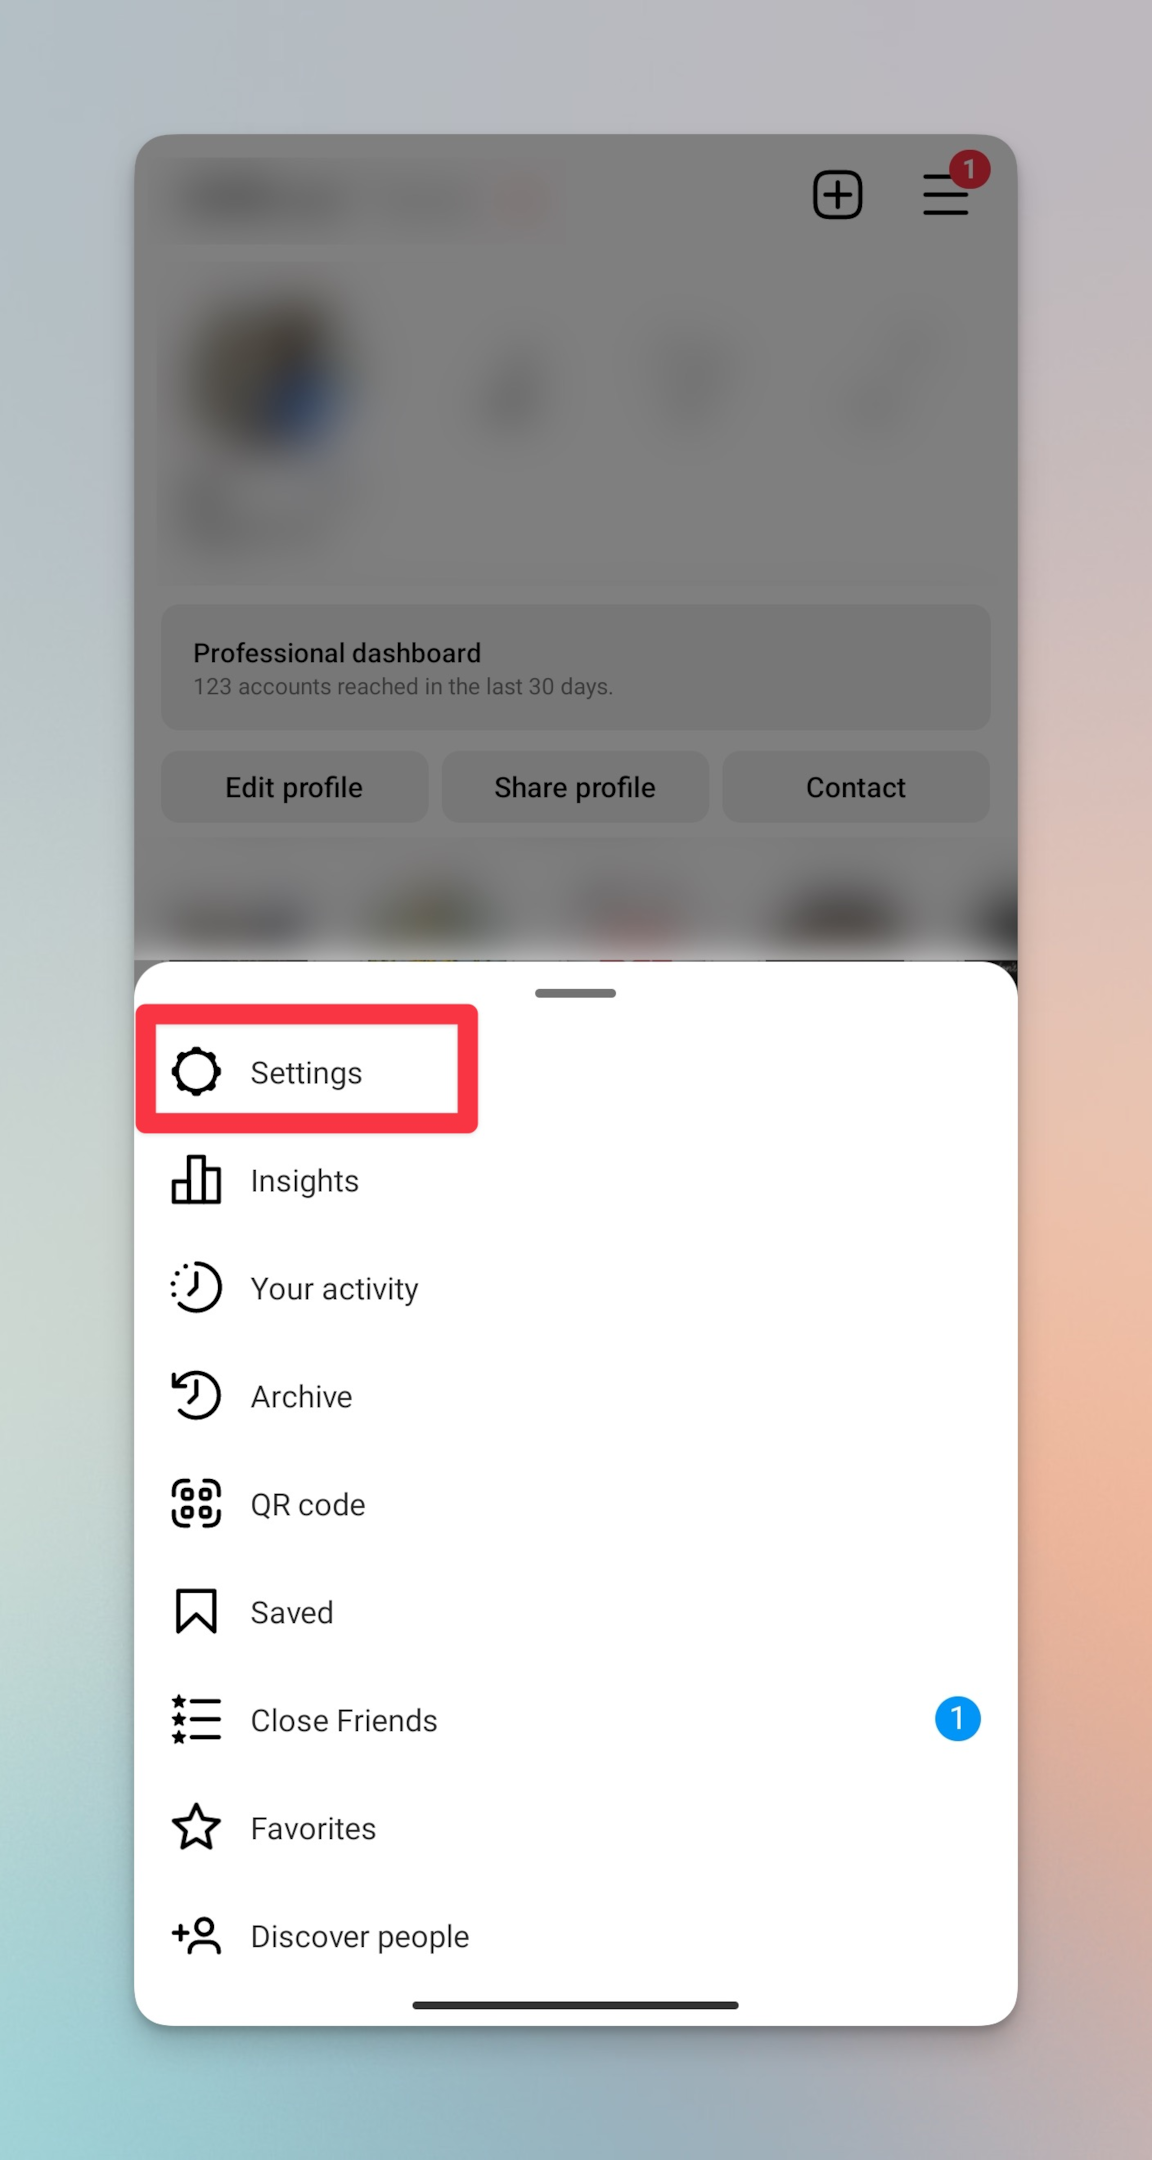 Remote.tools is highlighting Settings menu to switch to private mode on Instagram